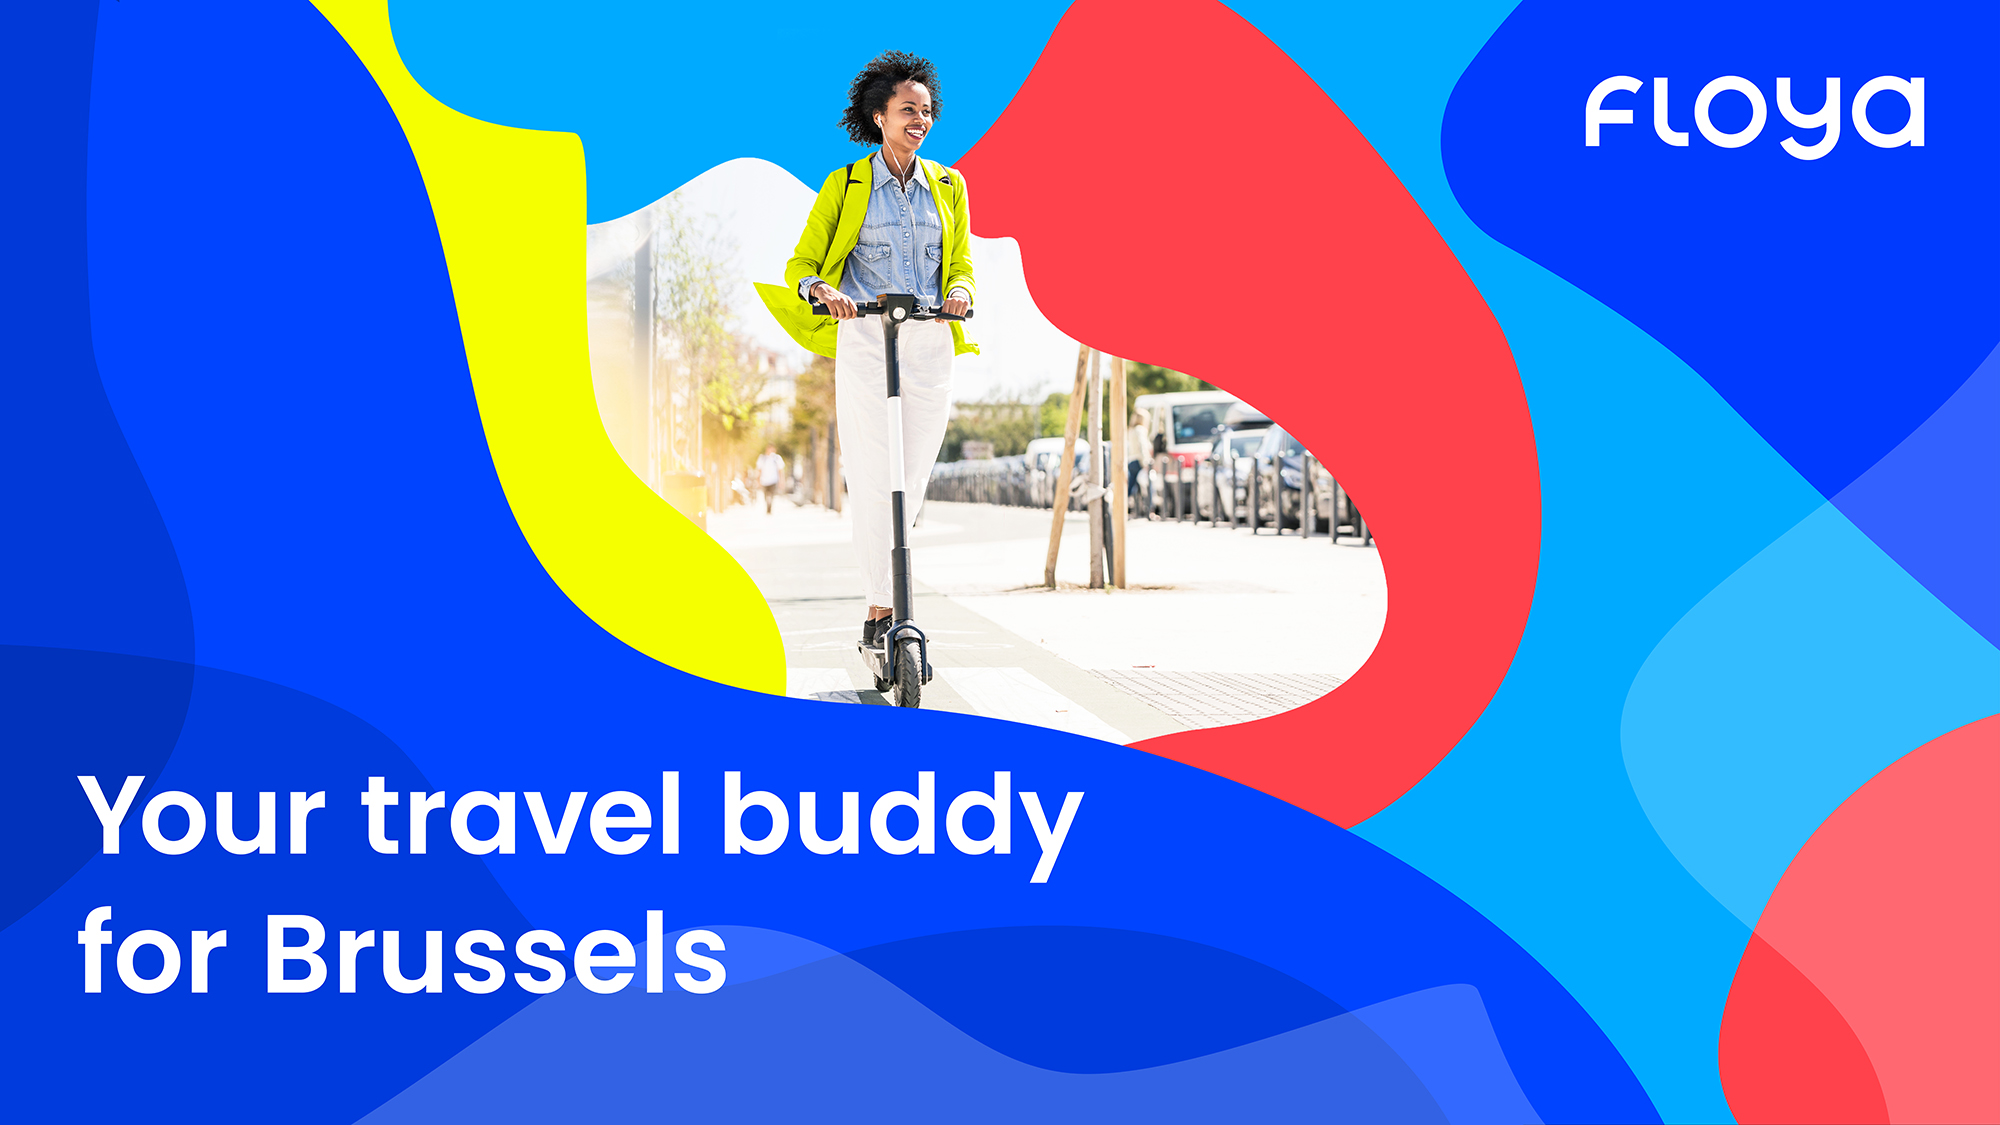 Floya – Your travel buddy for Brussels